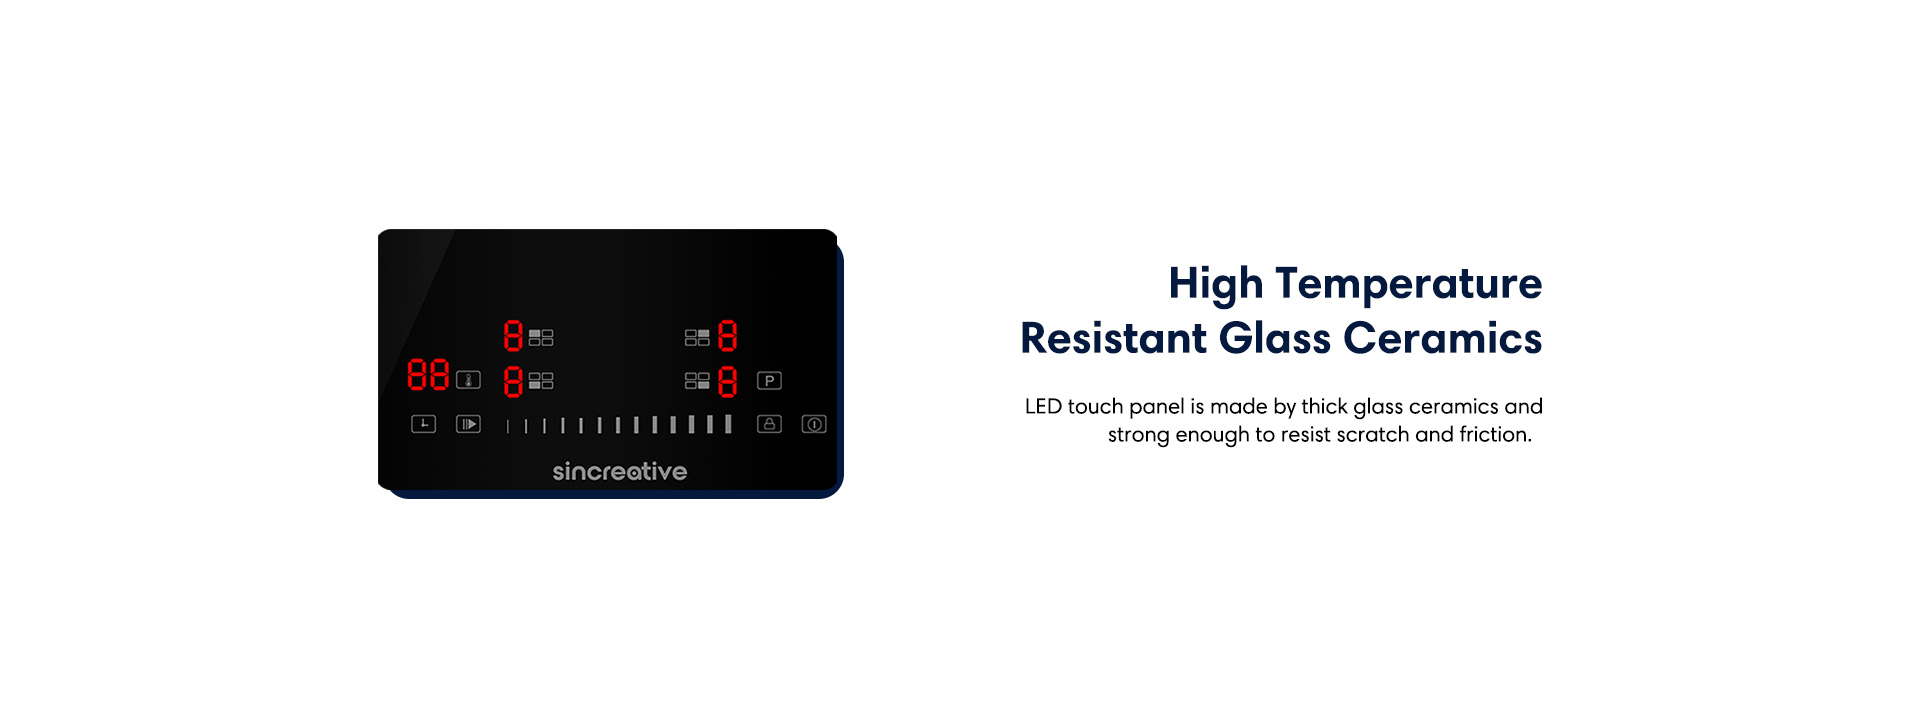 High temperature resistant glass ceramics LED touch panel is amde by thick glass ceramics and strong enough to resist scratch and friction.